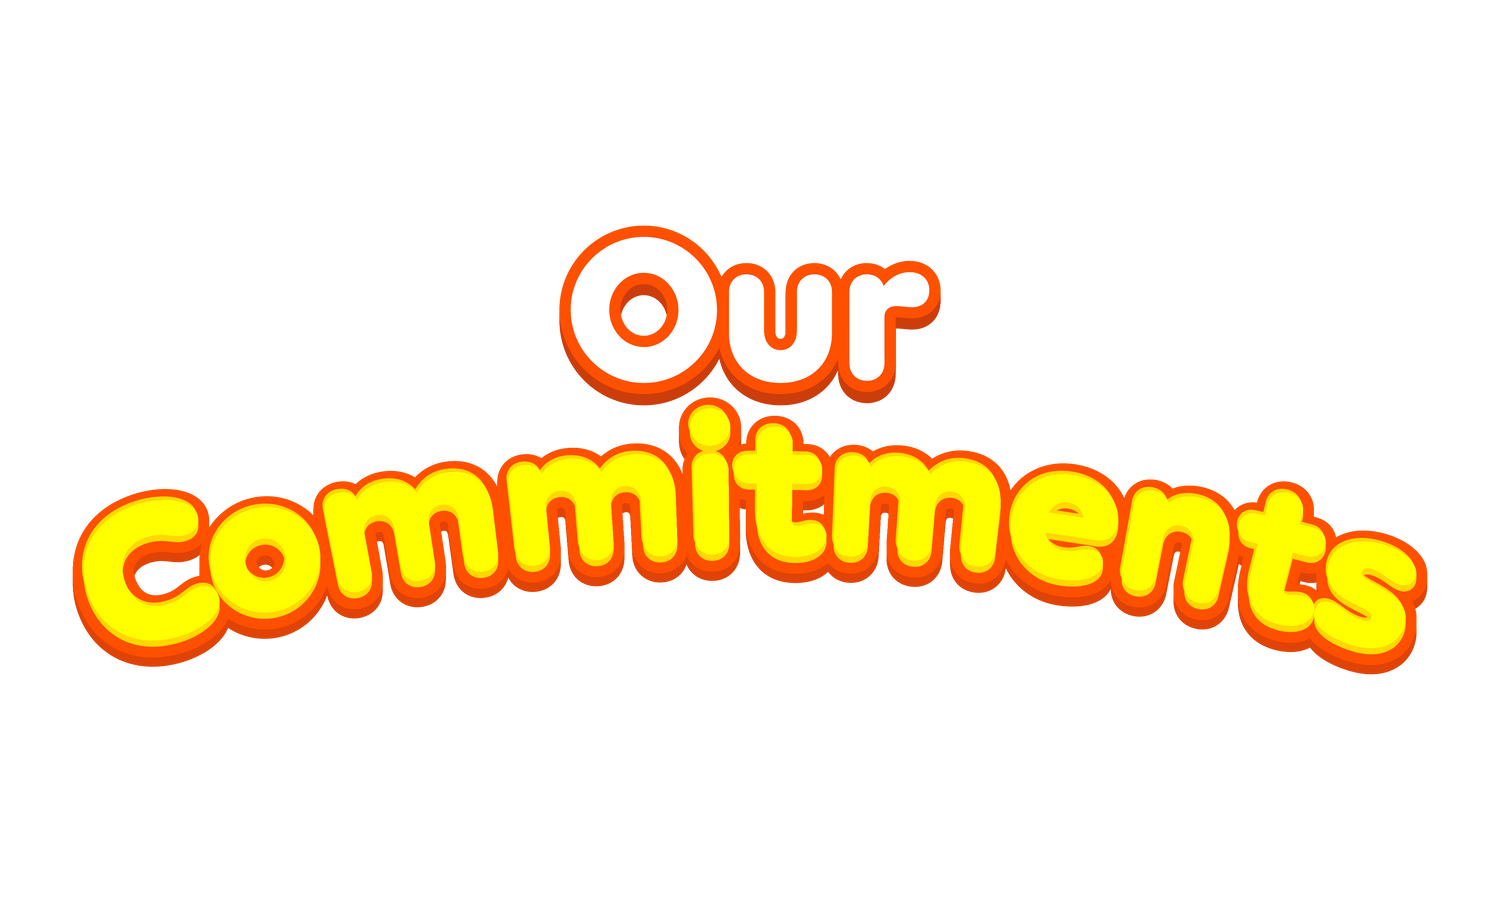 The words Our Commitments